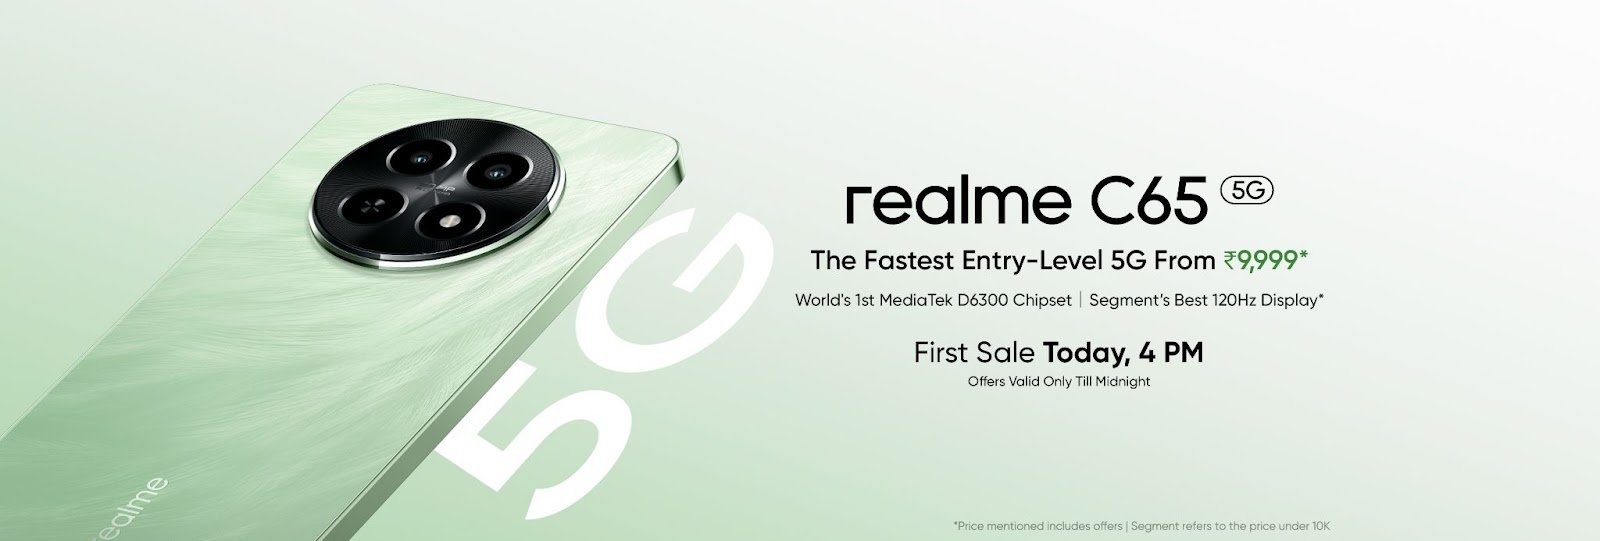 realme C65 5G Launch: Entry-Level Smartphone with Cutting-Edge Features